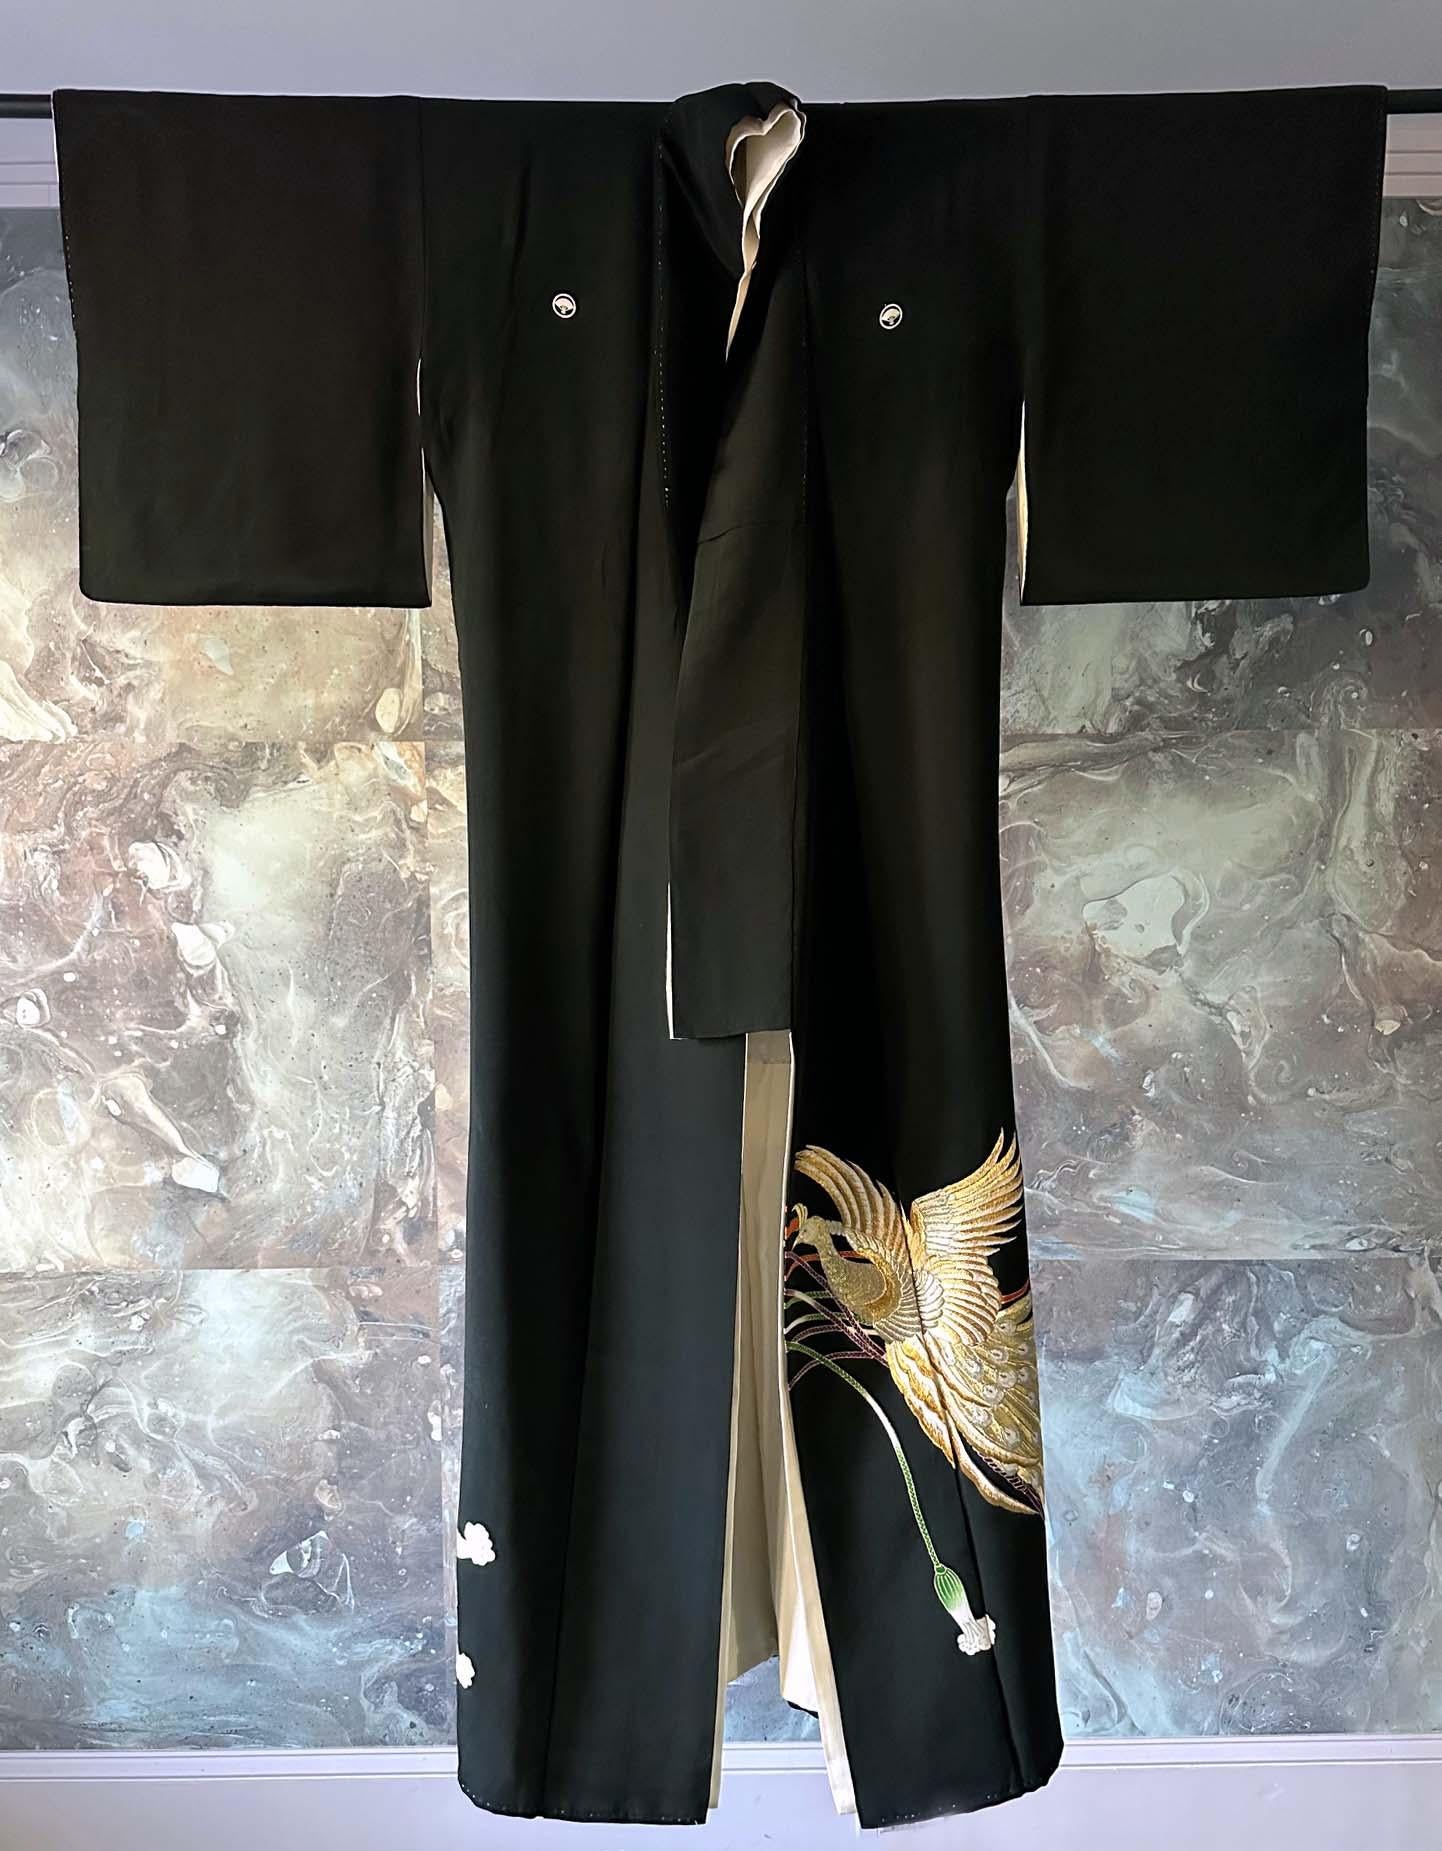 A vintage Japanese silk Kuro Tomesode Kimono, circa 1950s-1980s. Kuro Tomesode is a dress for married woman for the most formal occasions, equivalent of the evening gowns in the west. It is overall black, decorated only with patterns of bright